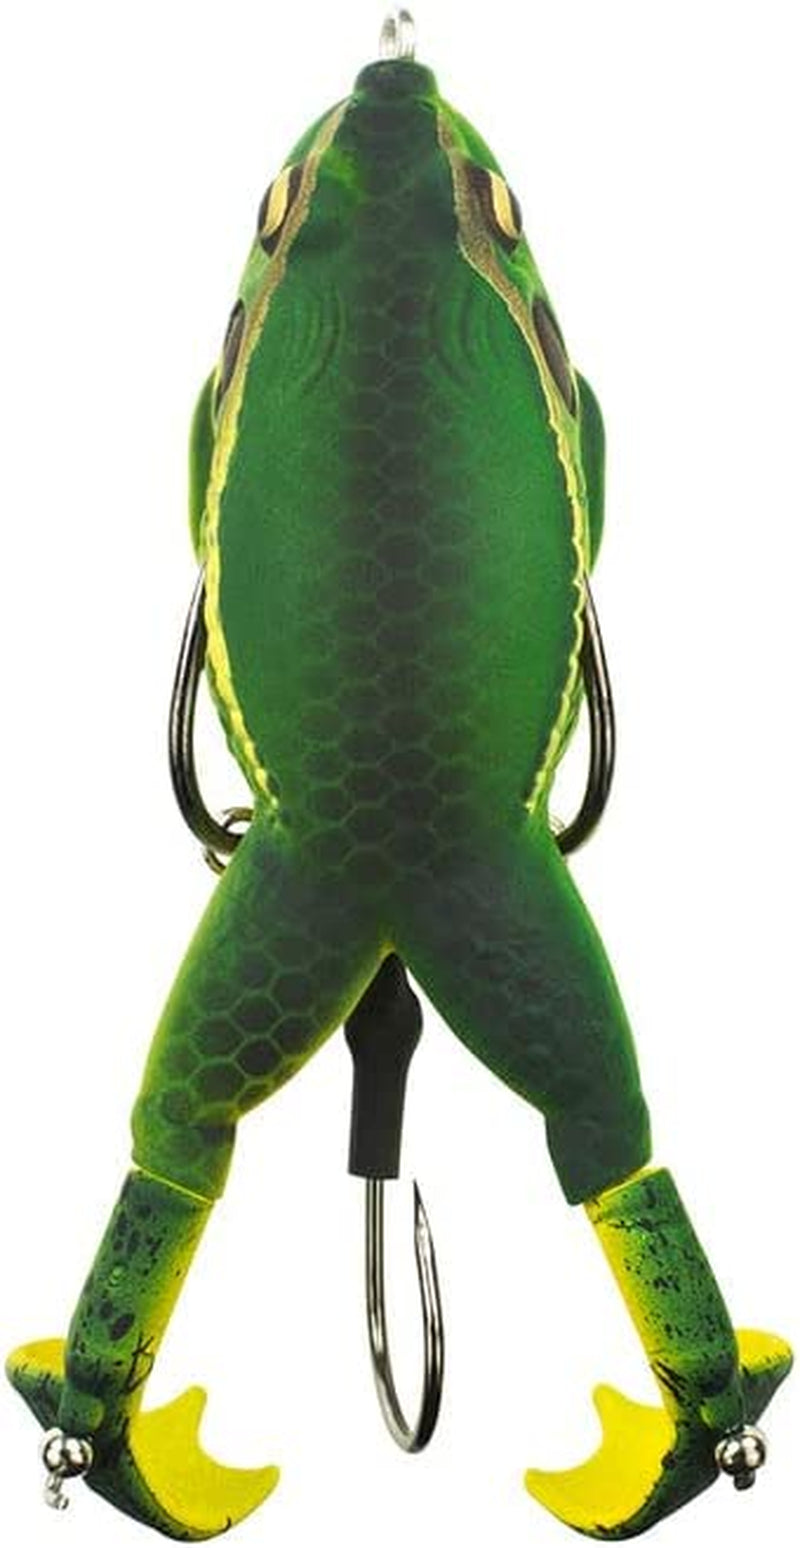 Lunkerhunt Prop Frog – Freshwater Fishing Lure with Realistic Design, Weighs ½ Oz, 3.5” Length Sporting Goods > Outdoor Recreation > Fishing > Fishing Tackle > Fishing Baits & Lures Lunkerhunt Blue Gill  